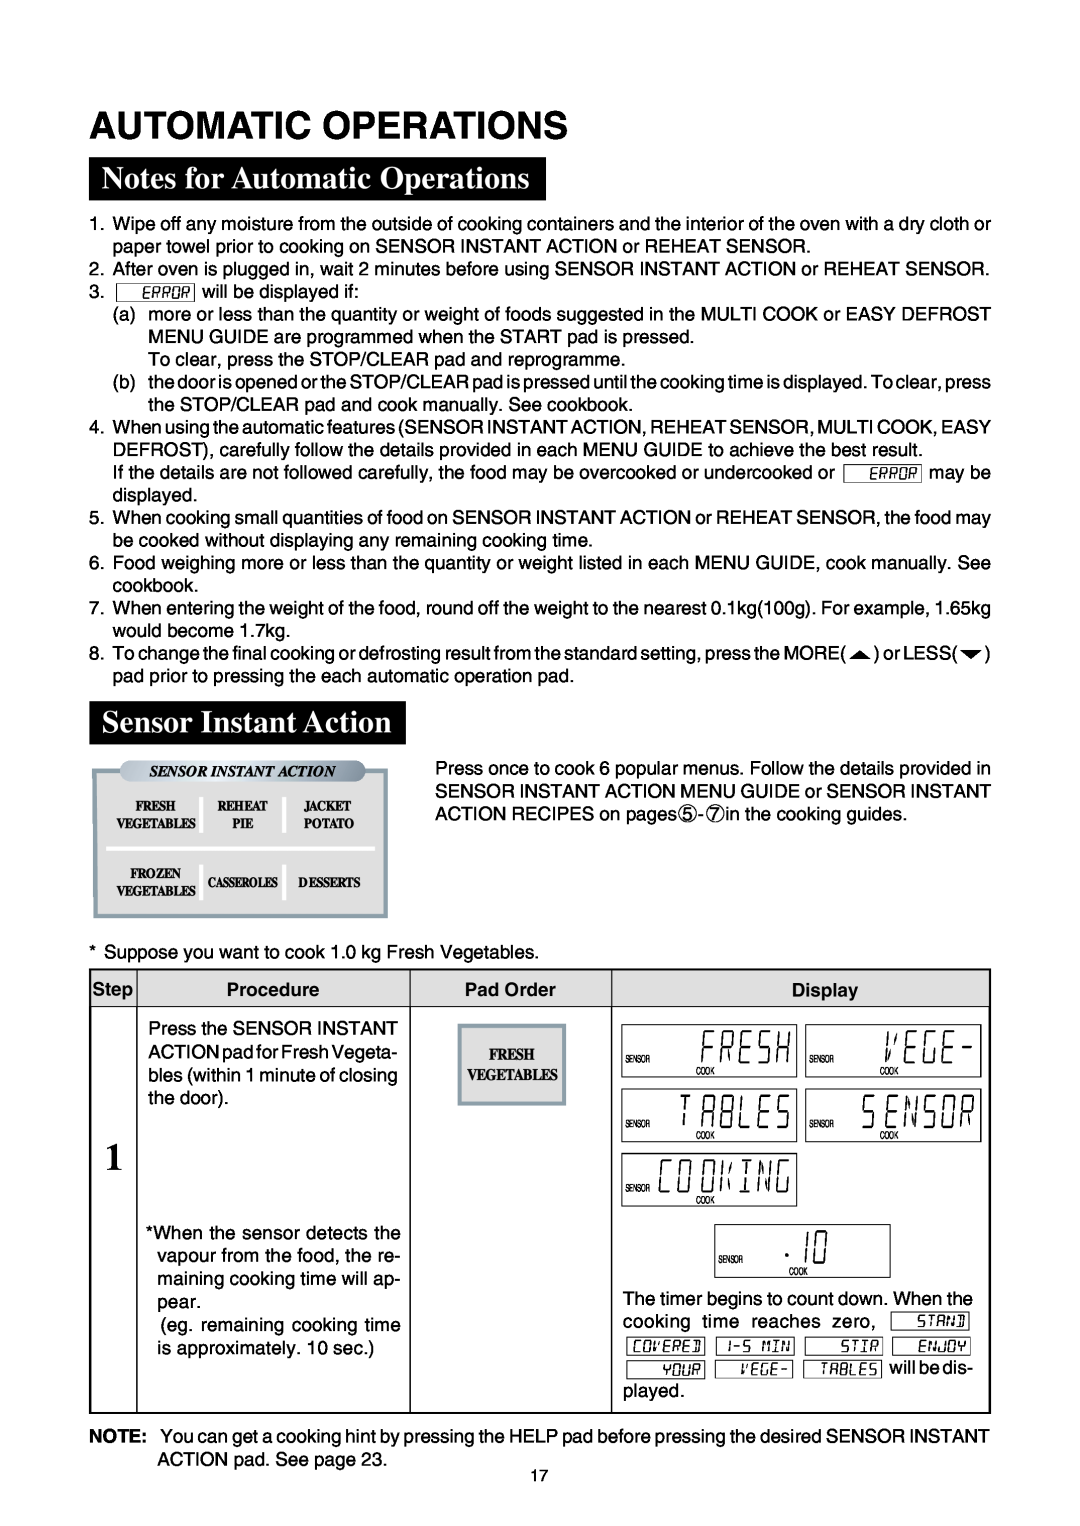 Sharp R-980E operation manual Notes for Automatic Operations, Sensor Instant Action 